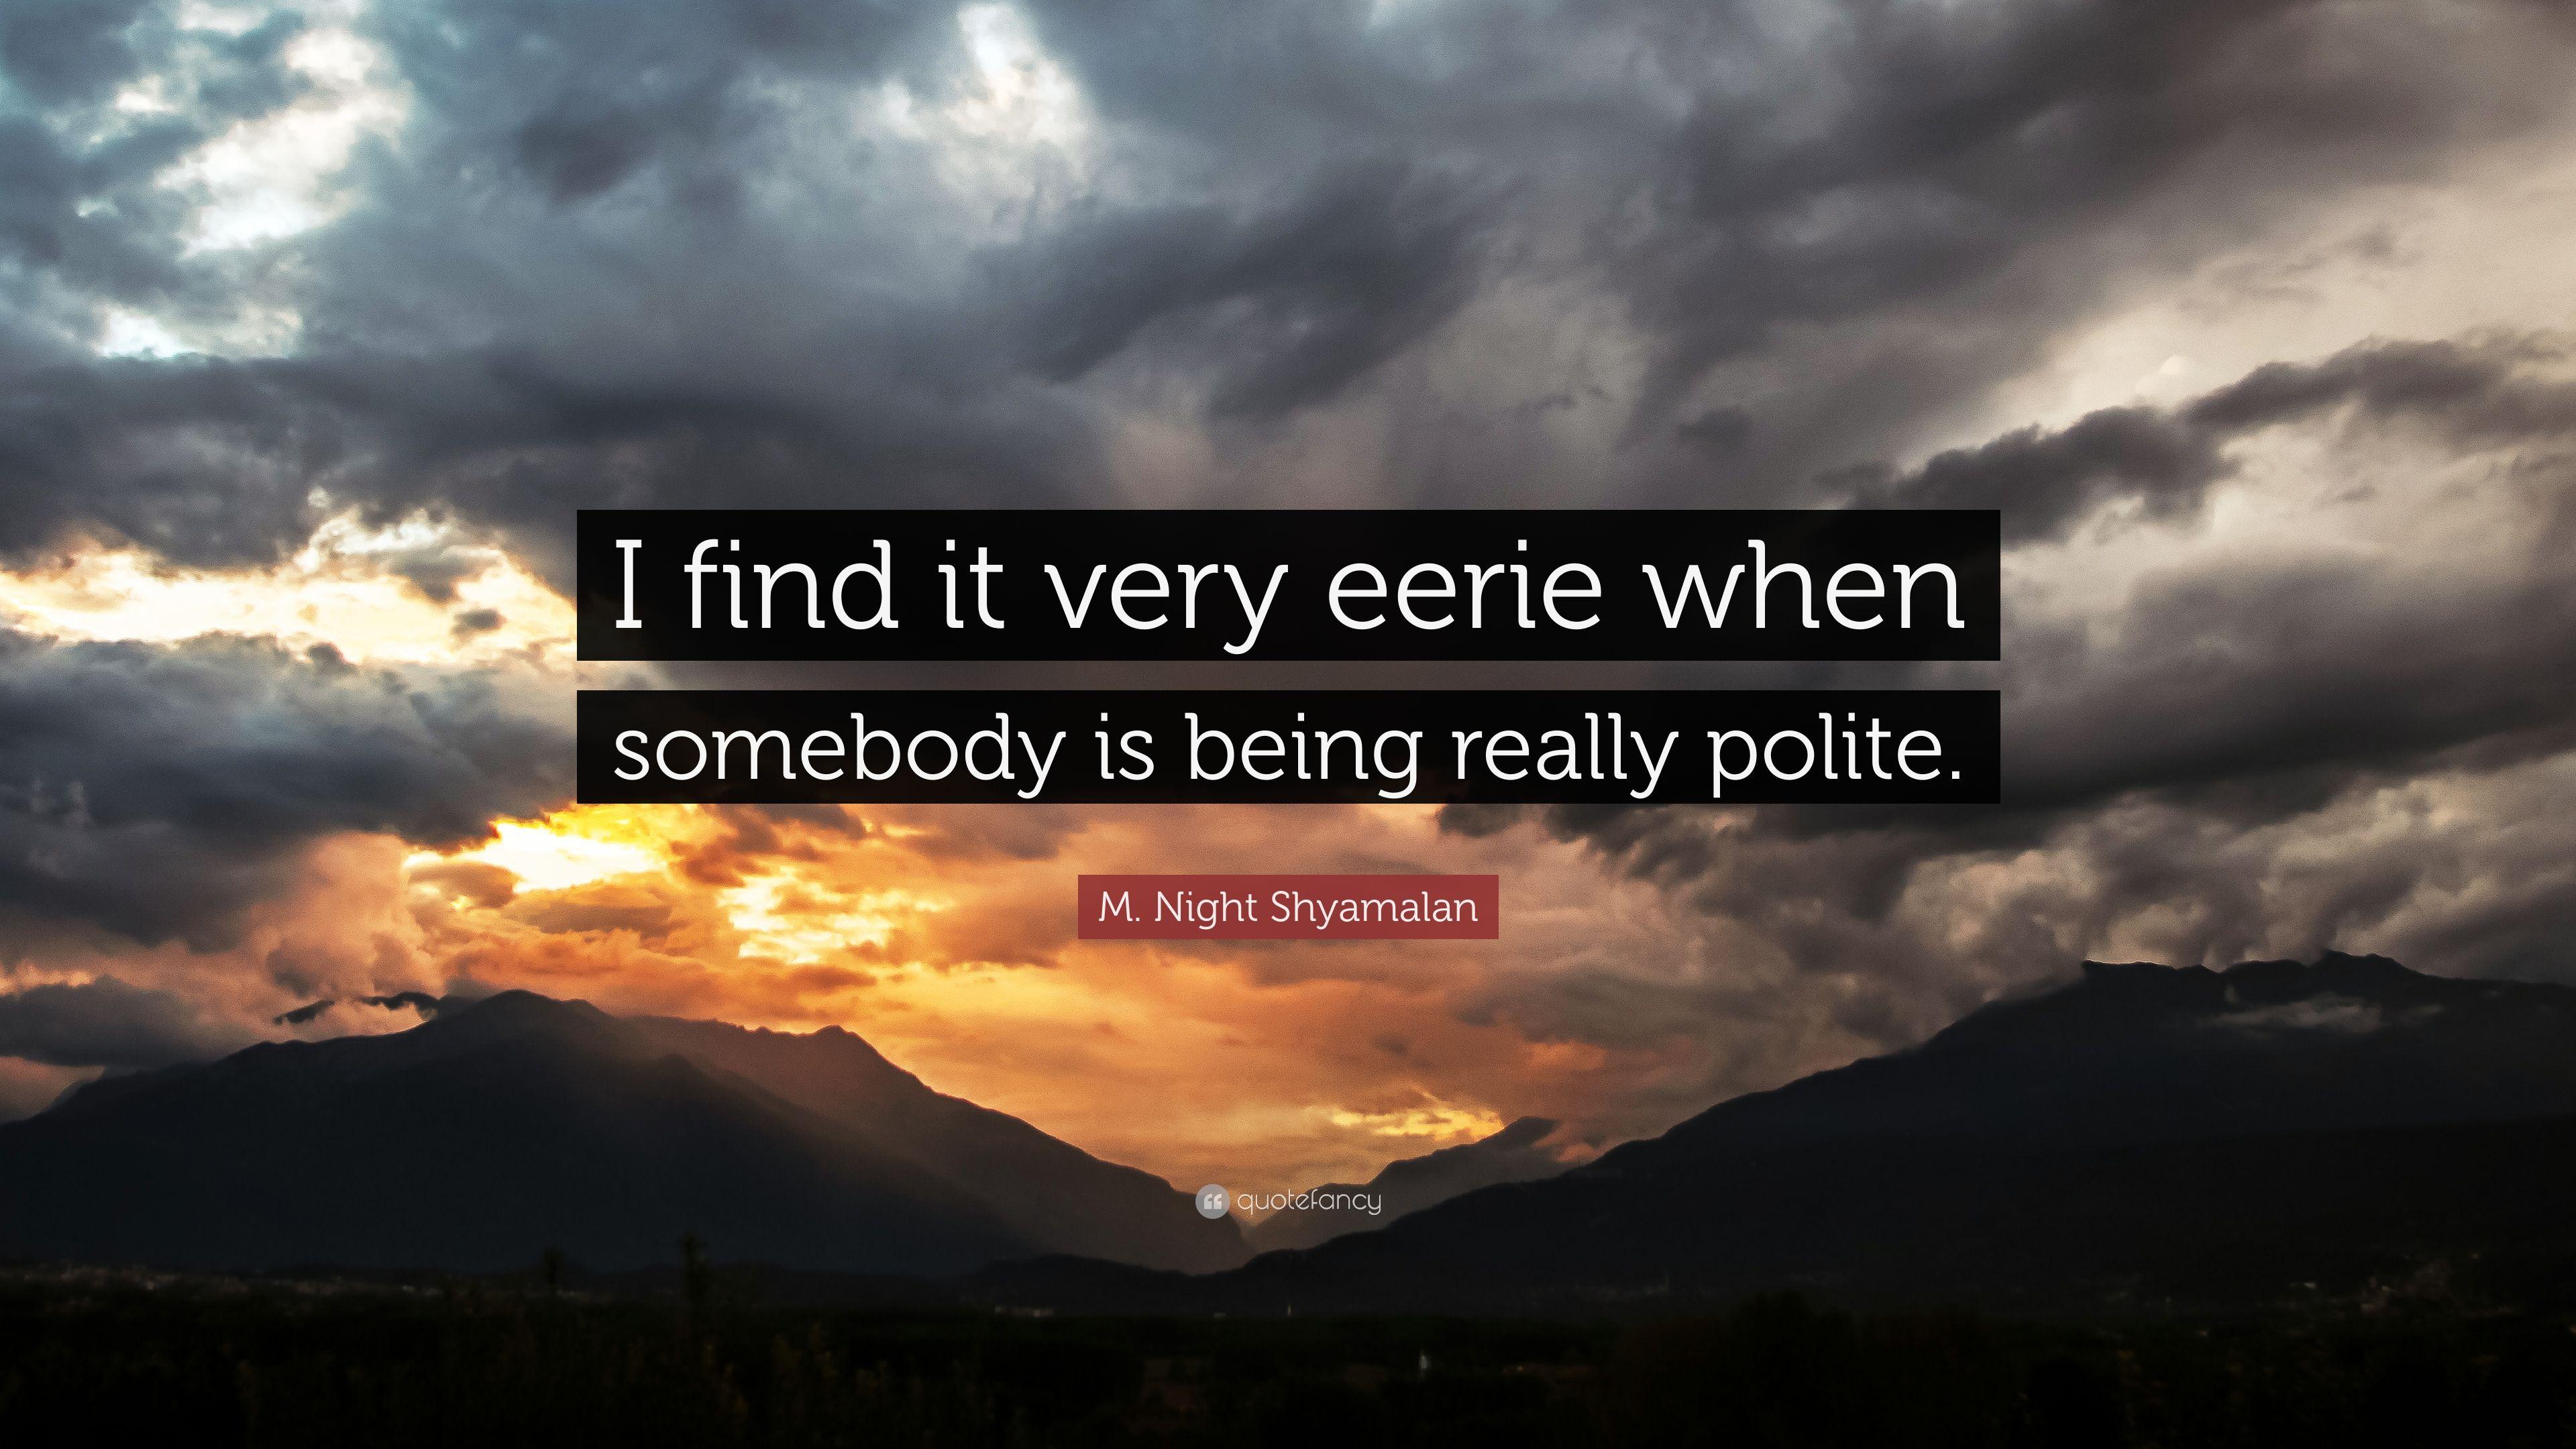 M. Night Shyamalan Quote: “I find it very eerie when somebody is